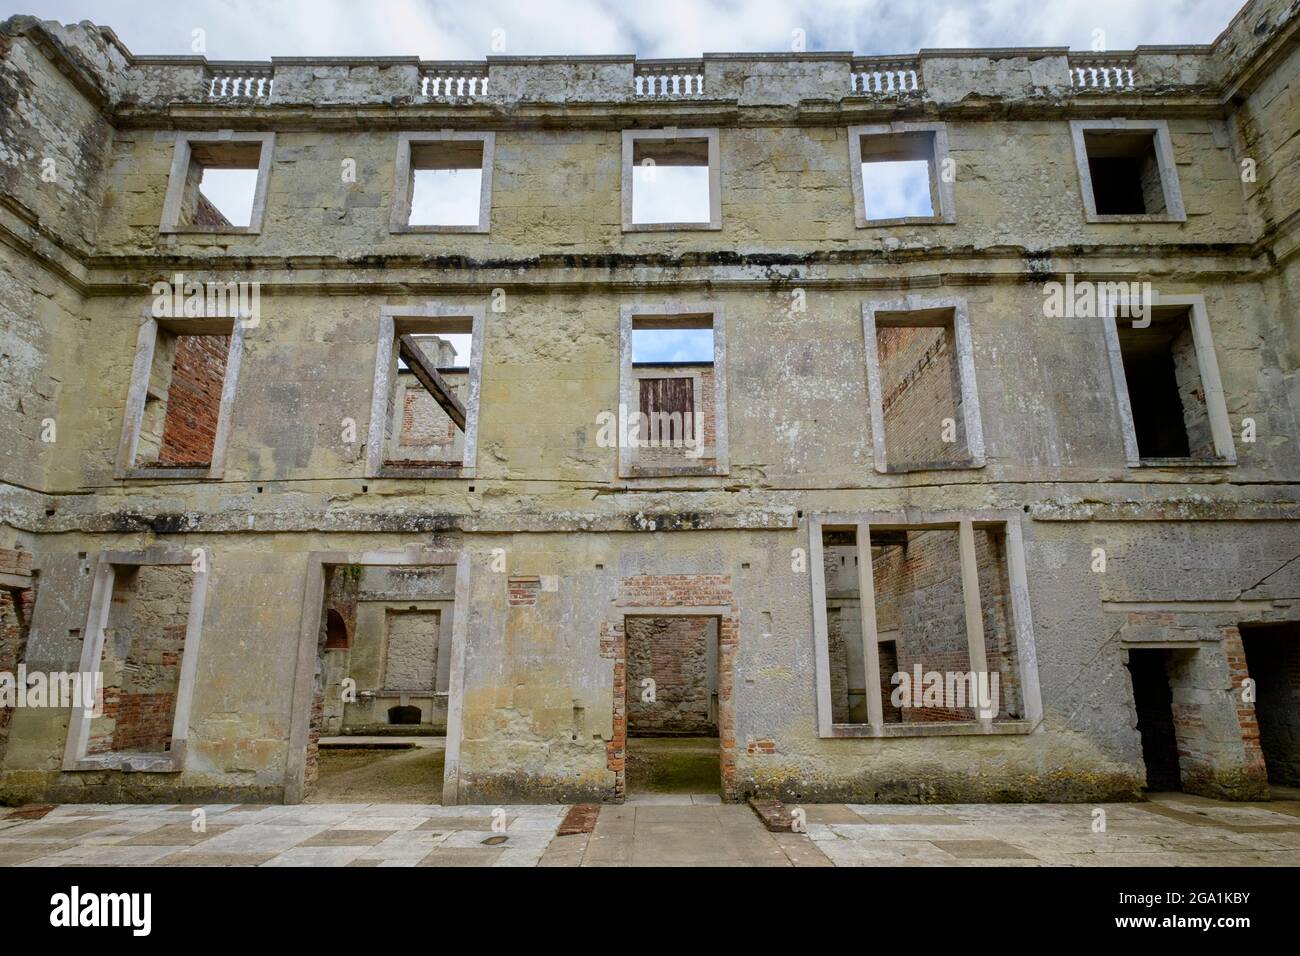 The ruins of Appuldurcombe House an 18th century Baroque style mansion owned by Sir Richard Worsley Isle of Wight Stock Photo